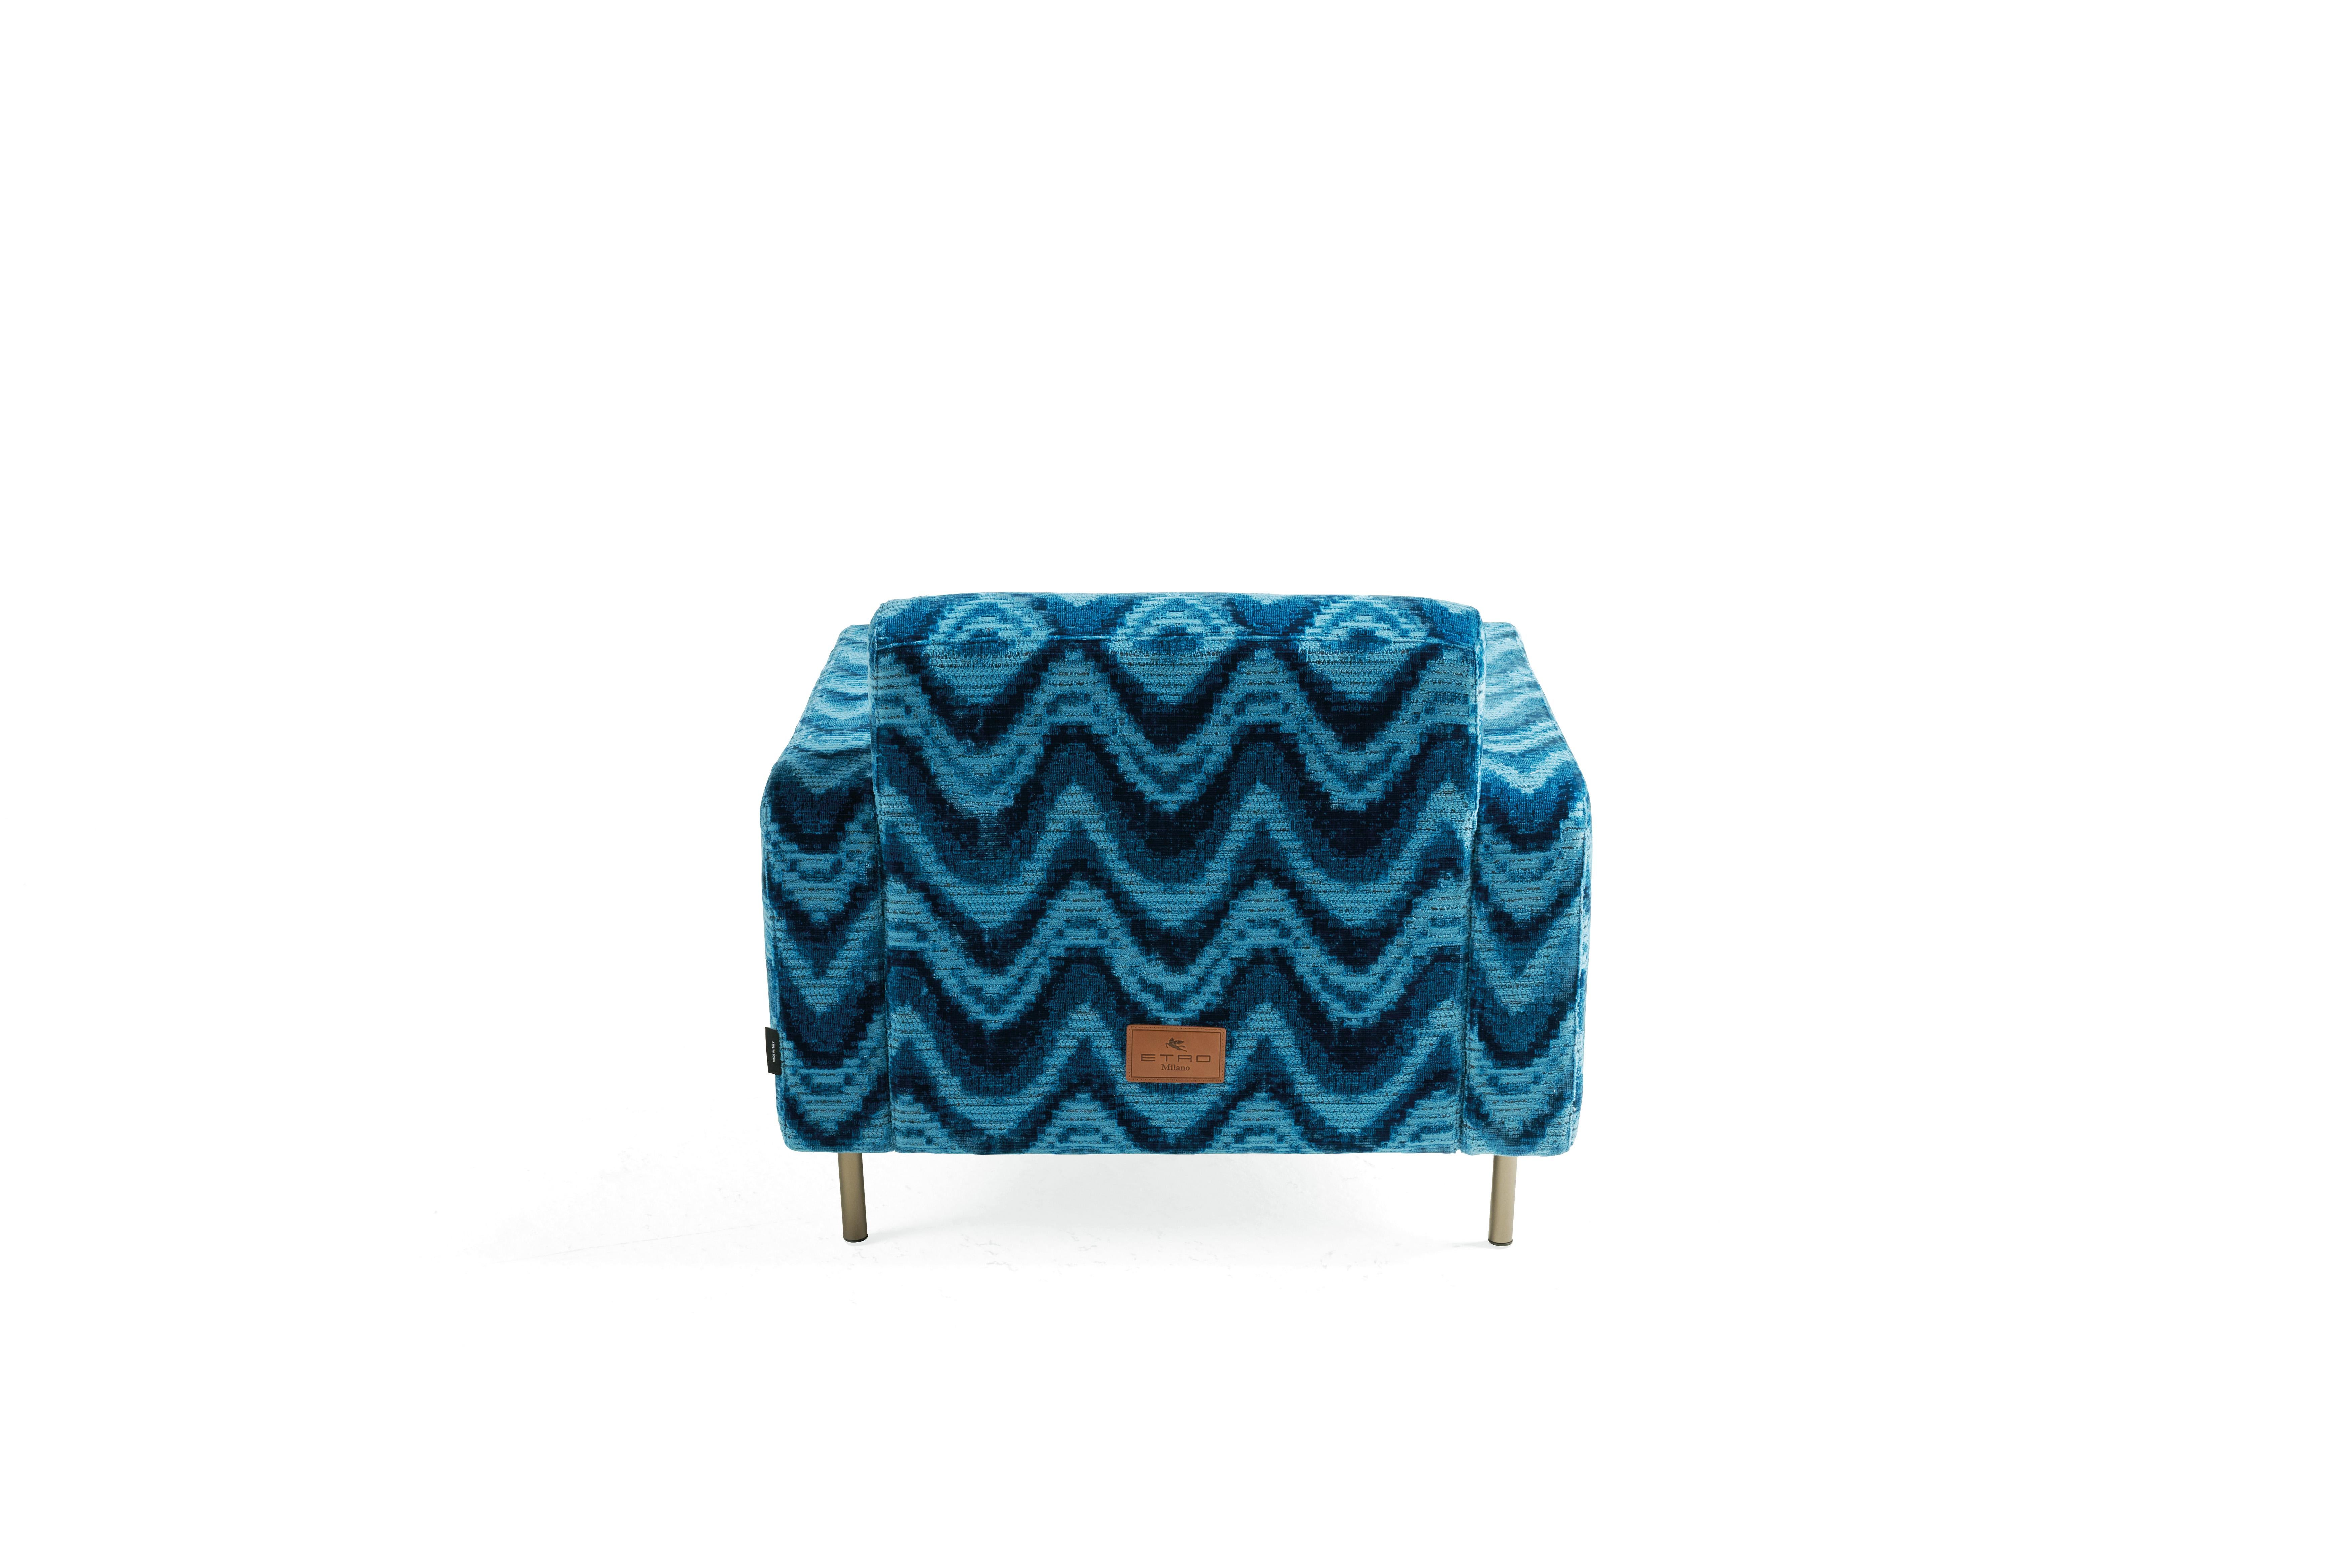 21st Century Type Armchair in Blue Jacquard Fabric by Etro Home Interiors In New Condition For Sale In Cantù, Lombardia